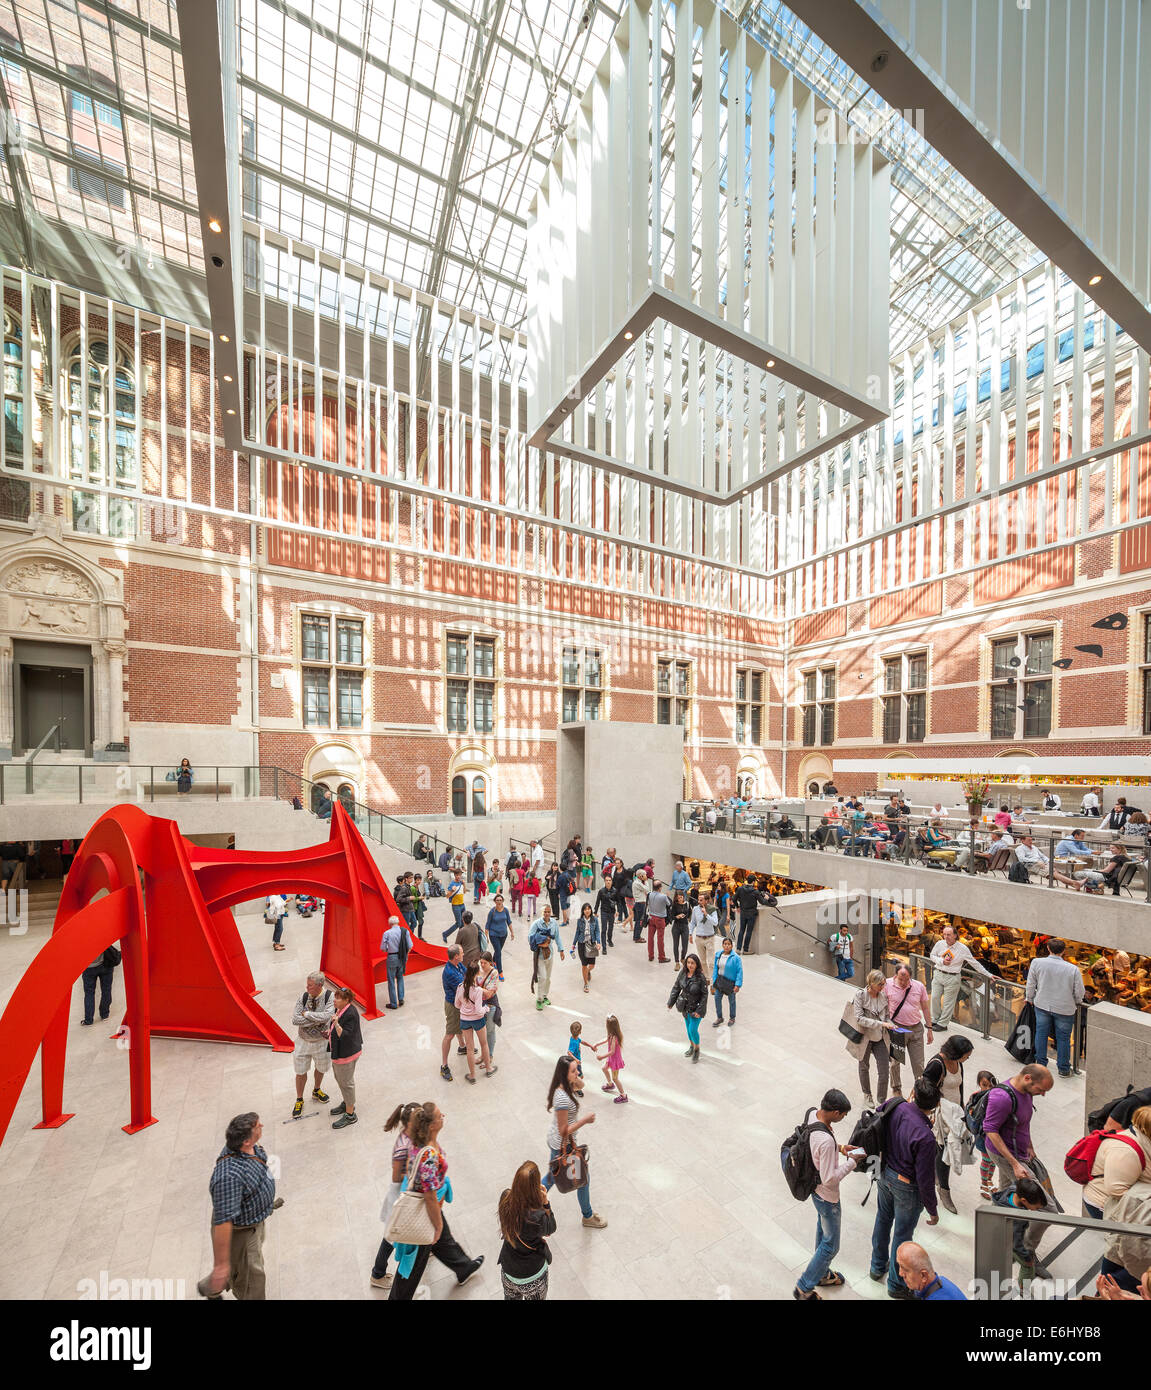 Rijksmuseum Amsterdam. The entrance hall lobby of the renovated (2003-2013) Rijksmuseum, with a sculpture by Calder and visitors Stock Photo